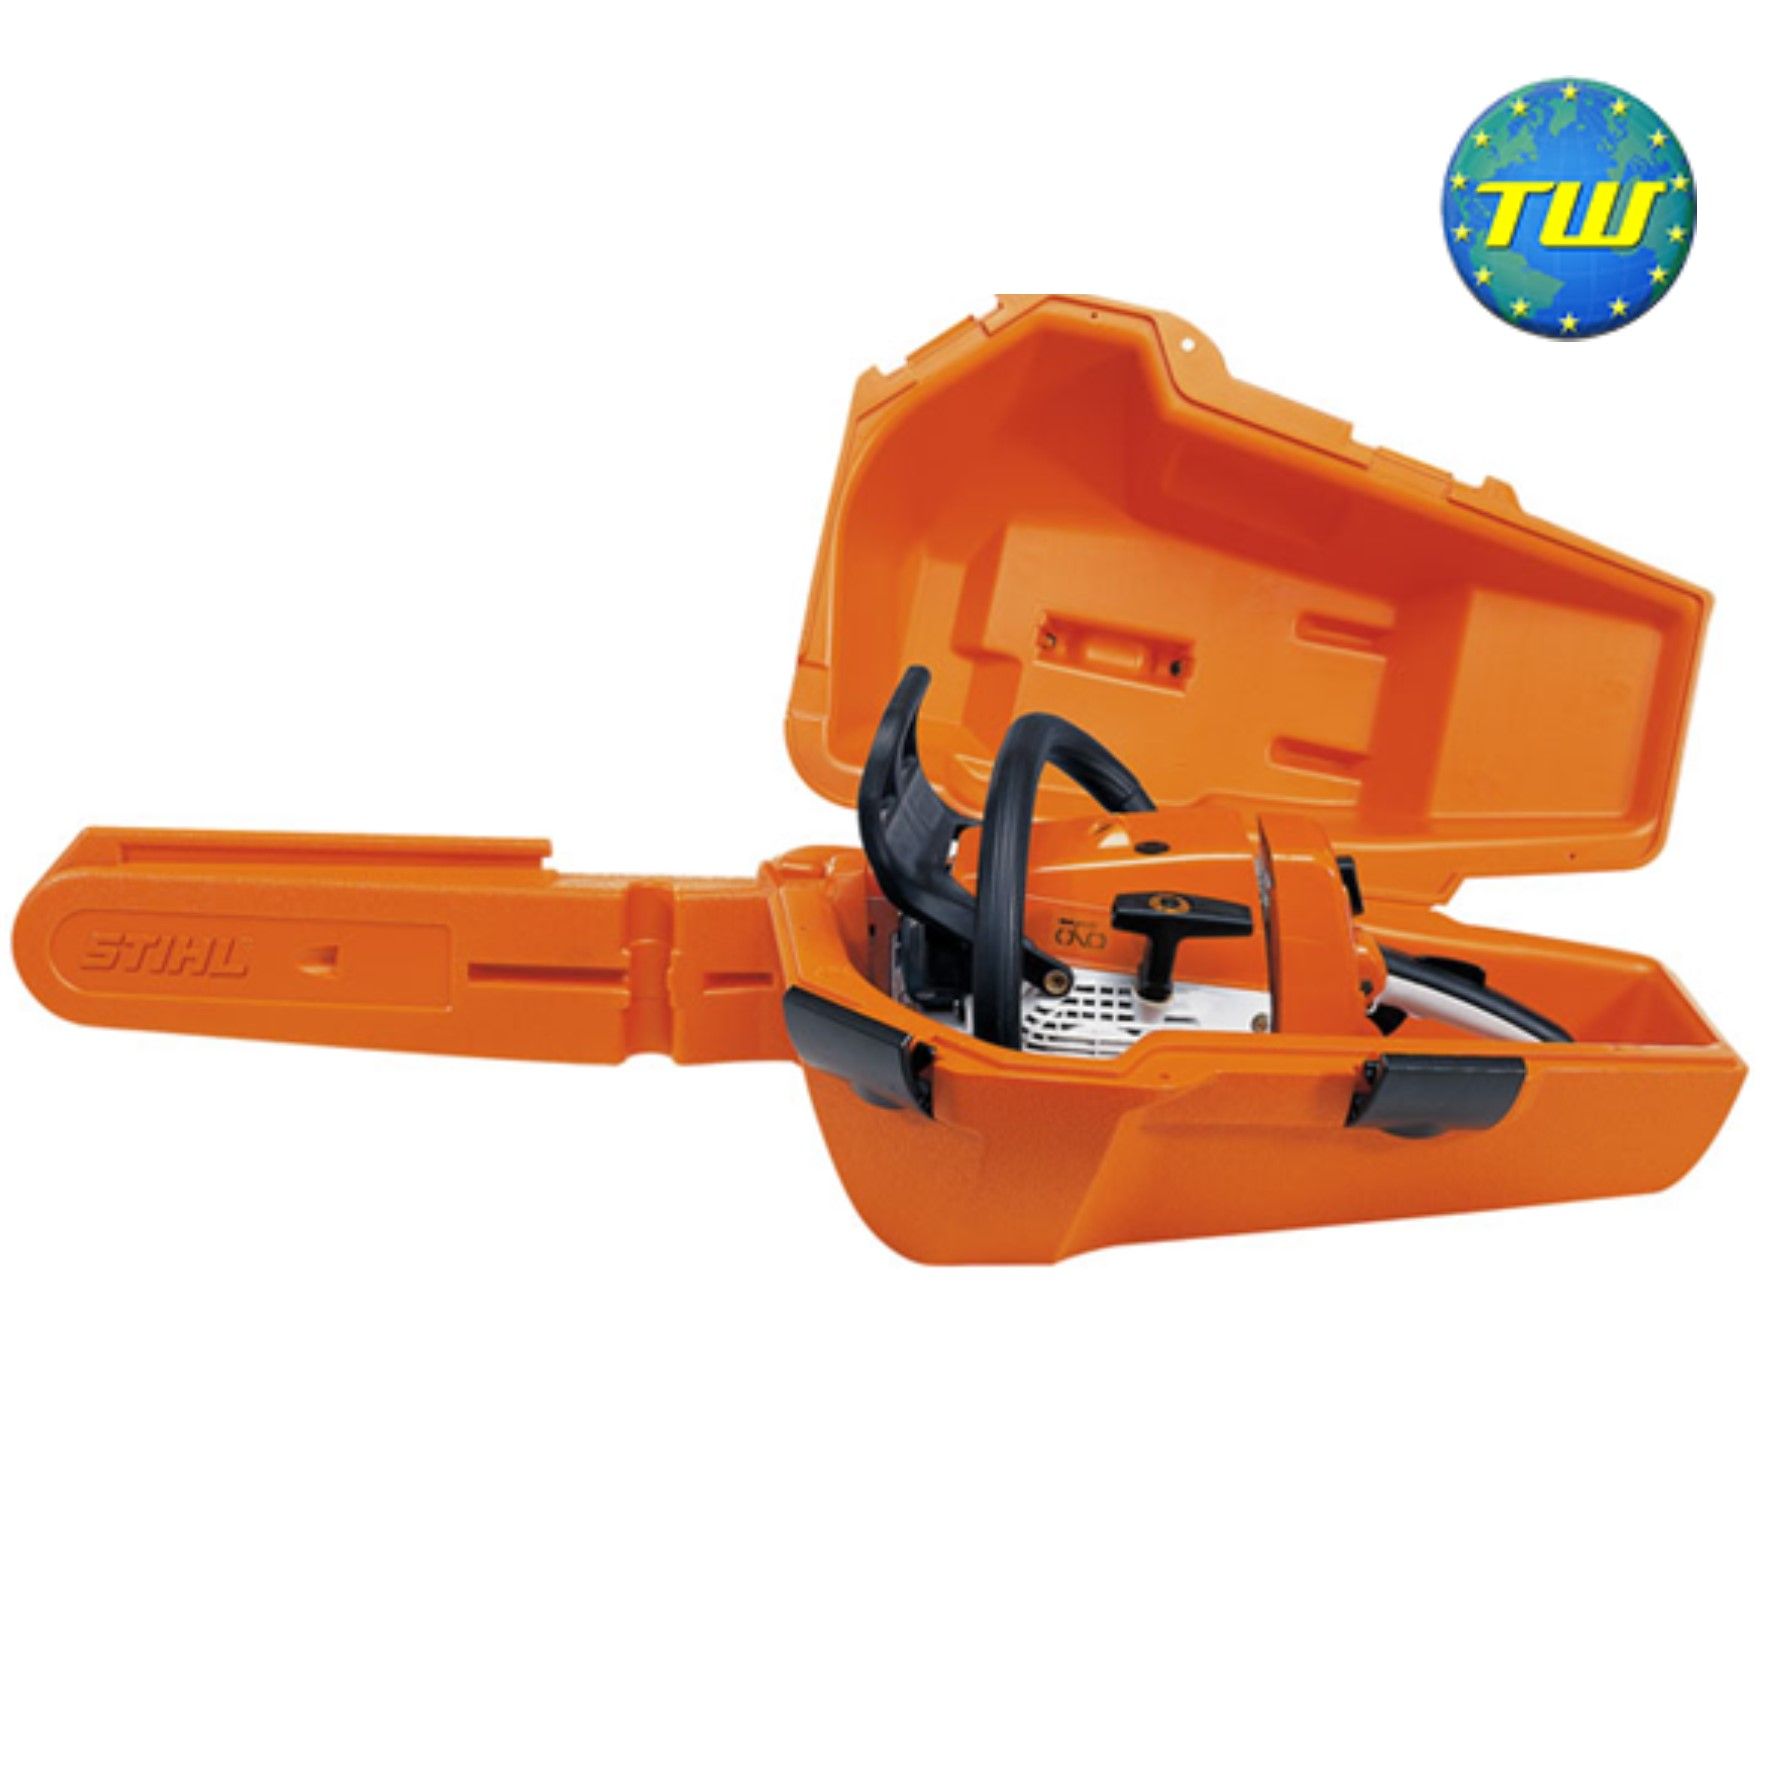 Stihl Universal Chainsaw Carry Case 00009004008 is made from durable ...